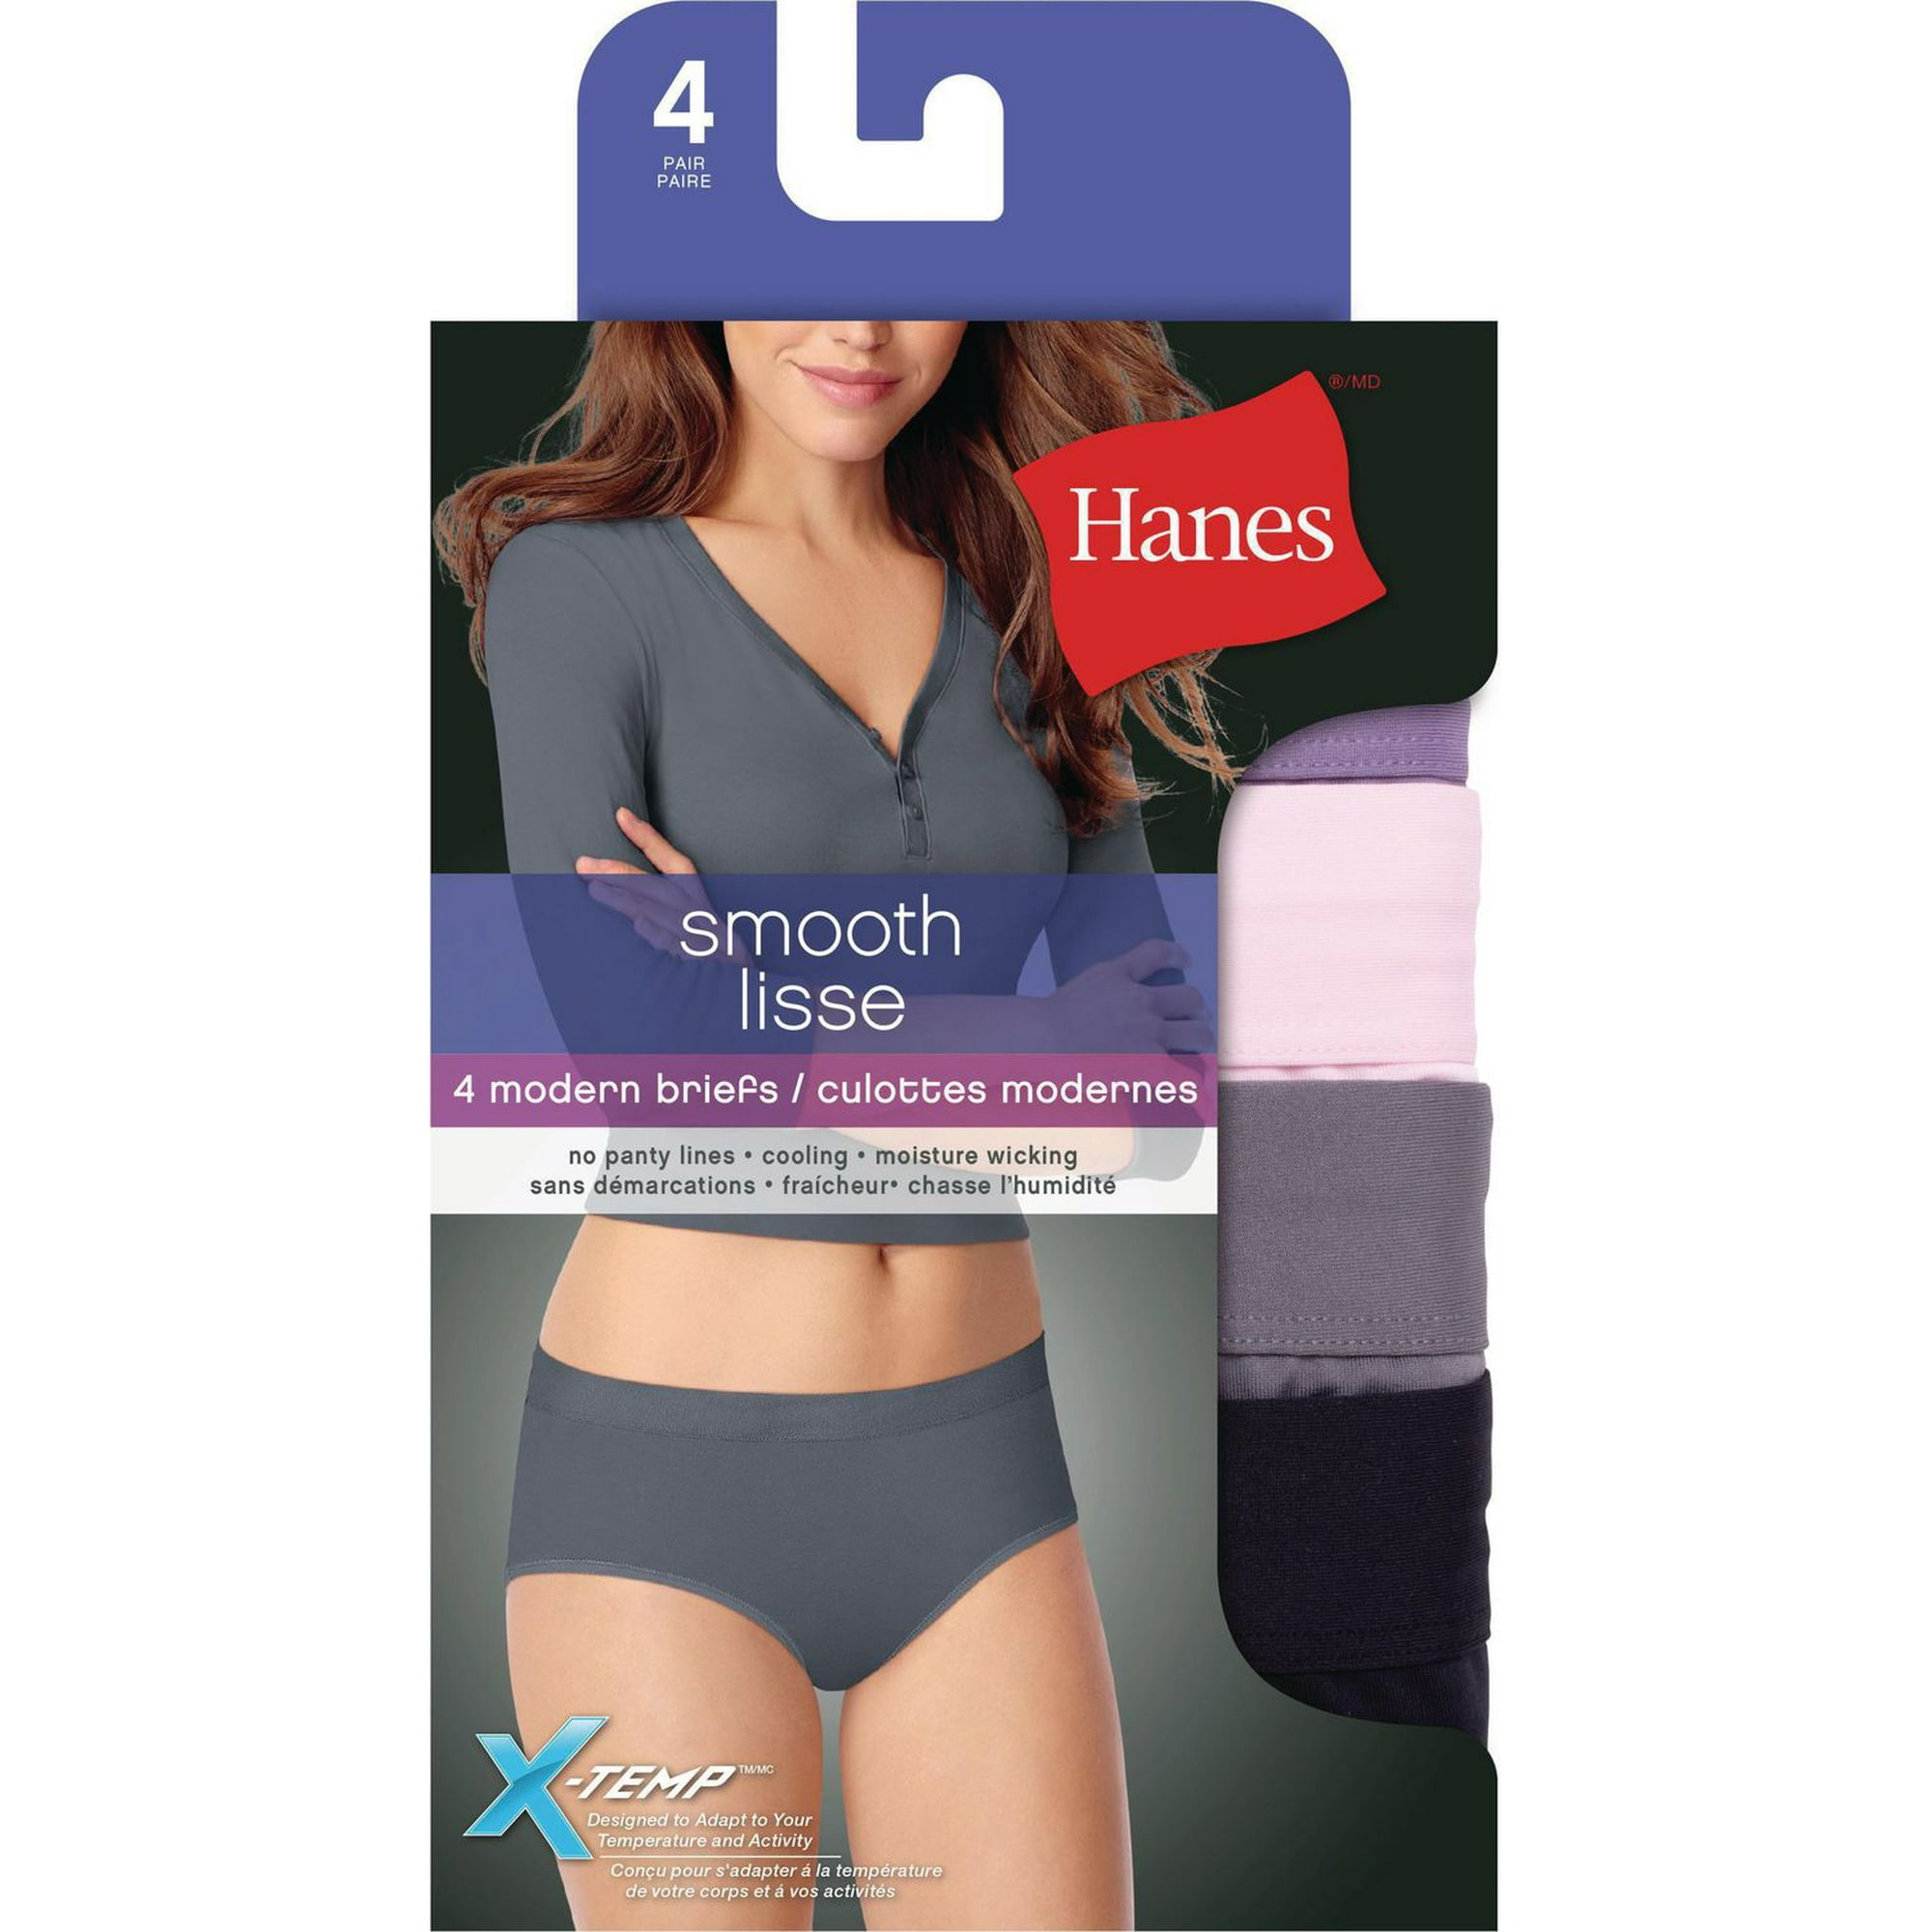 Women's Hanes Ultimate® 7-Pack Breathable Cotton Brief Panty 40HE7C